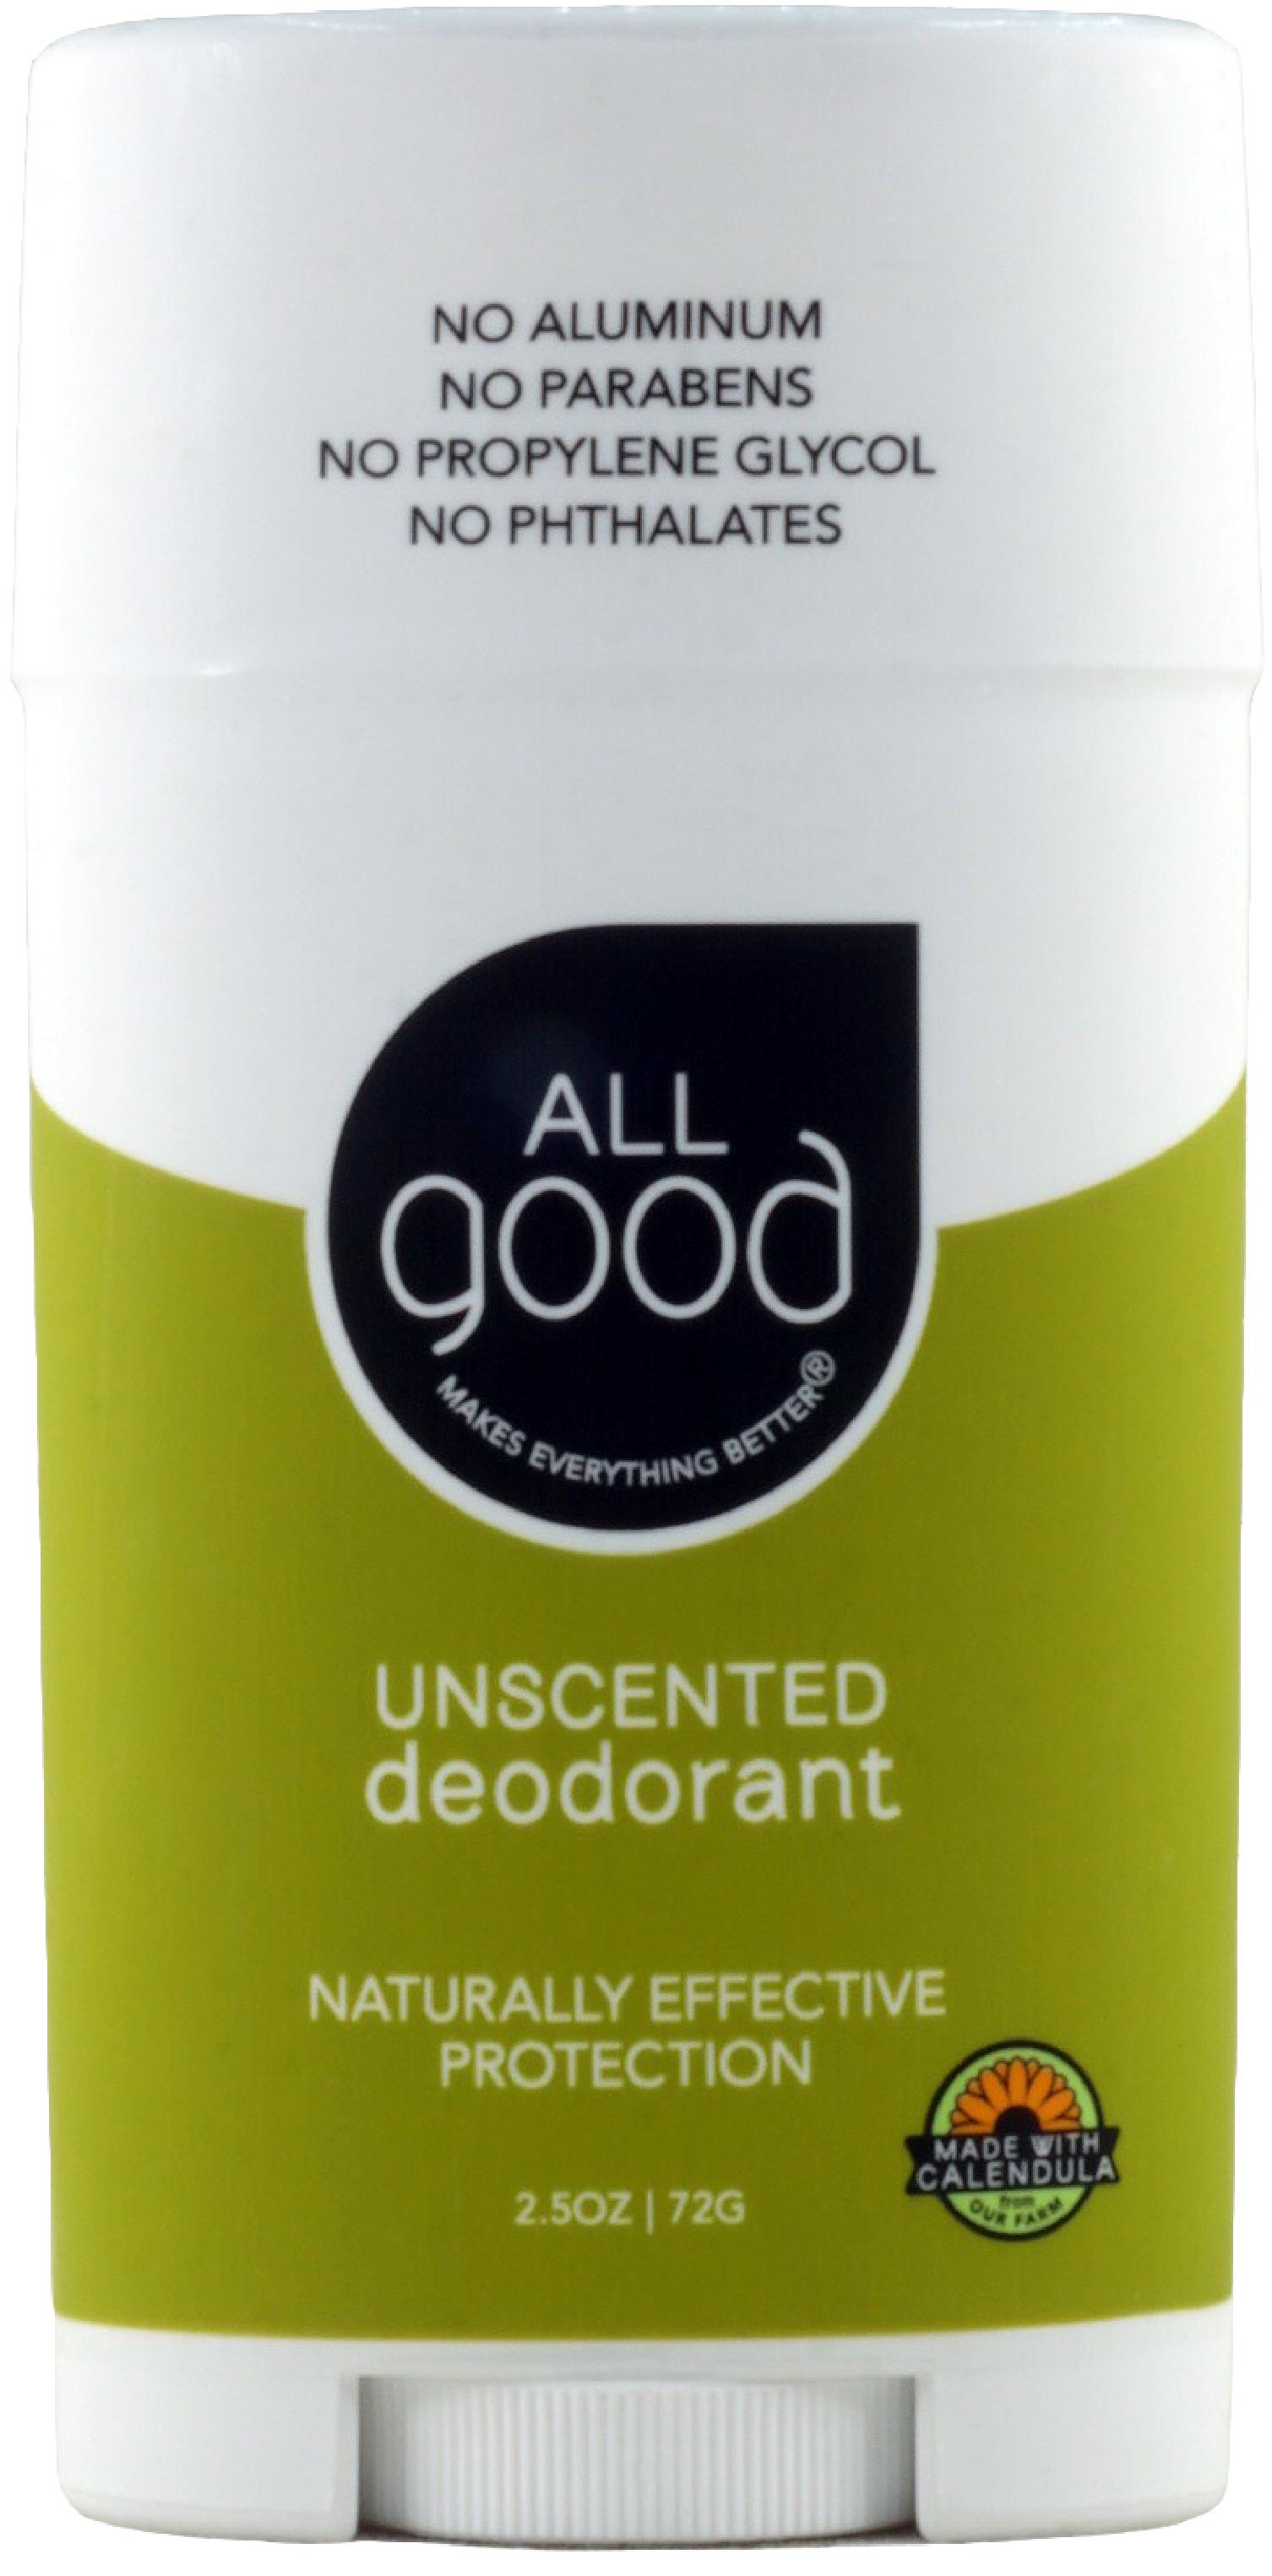 All Good Unscented Deodorant